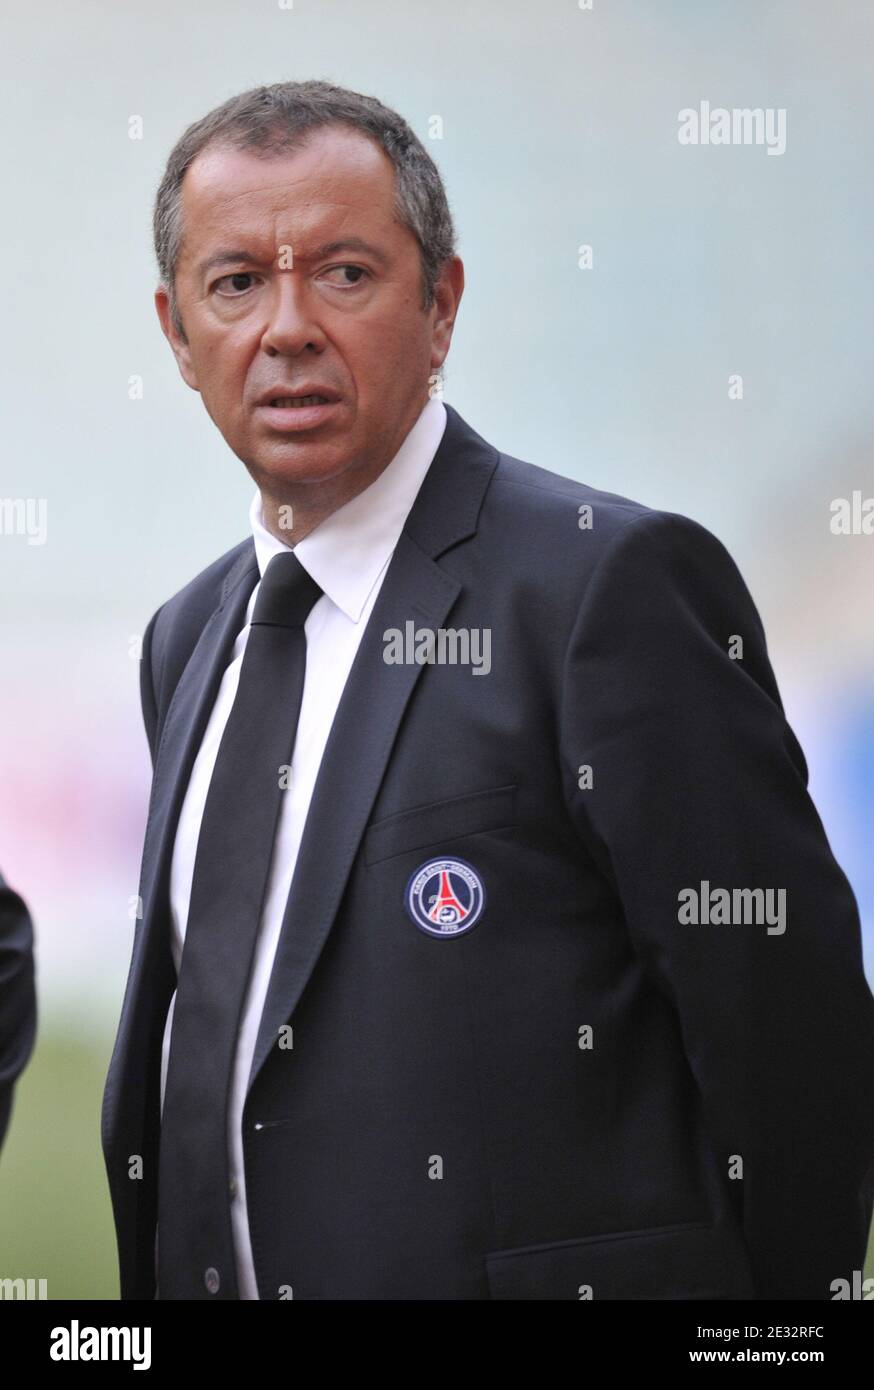 PSG's President Robin Leproux during a training session before the 'Champions' Trophy' soccer match, Olympique de Marseille vs Paris Saint-Germain at the Stade du '7 novembre' in Rades, Tunisia on July 27, 2010. Photo by Christophe Guibbaud/Cameleon/ABACAPRESS.COM Stock Photo